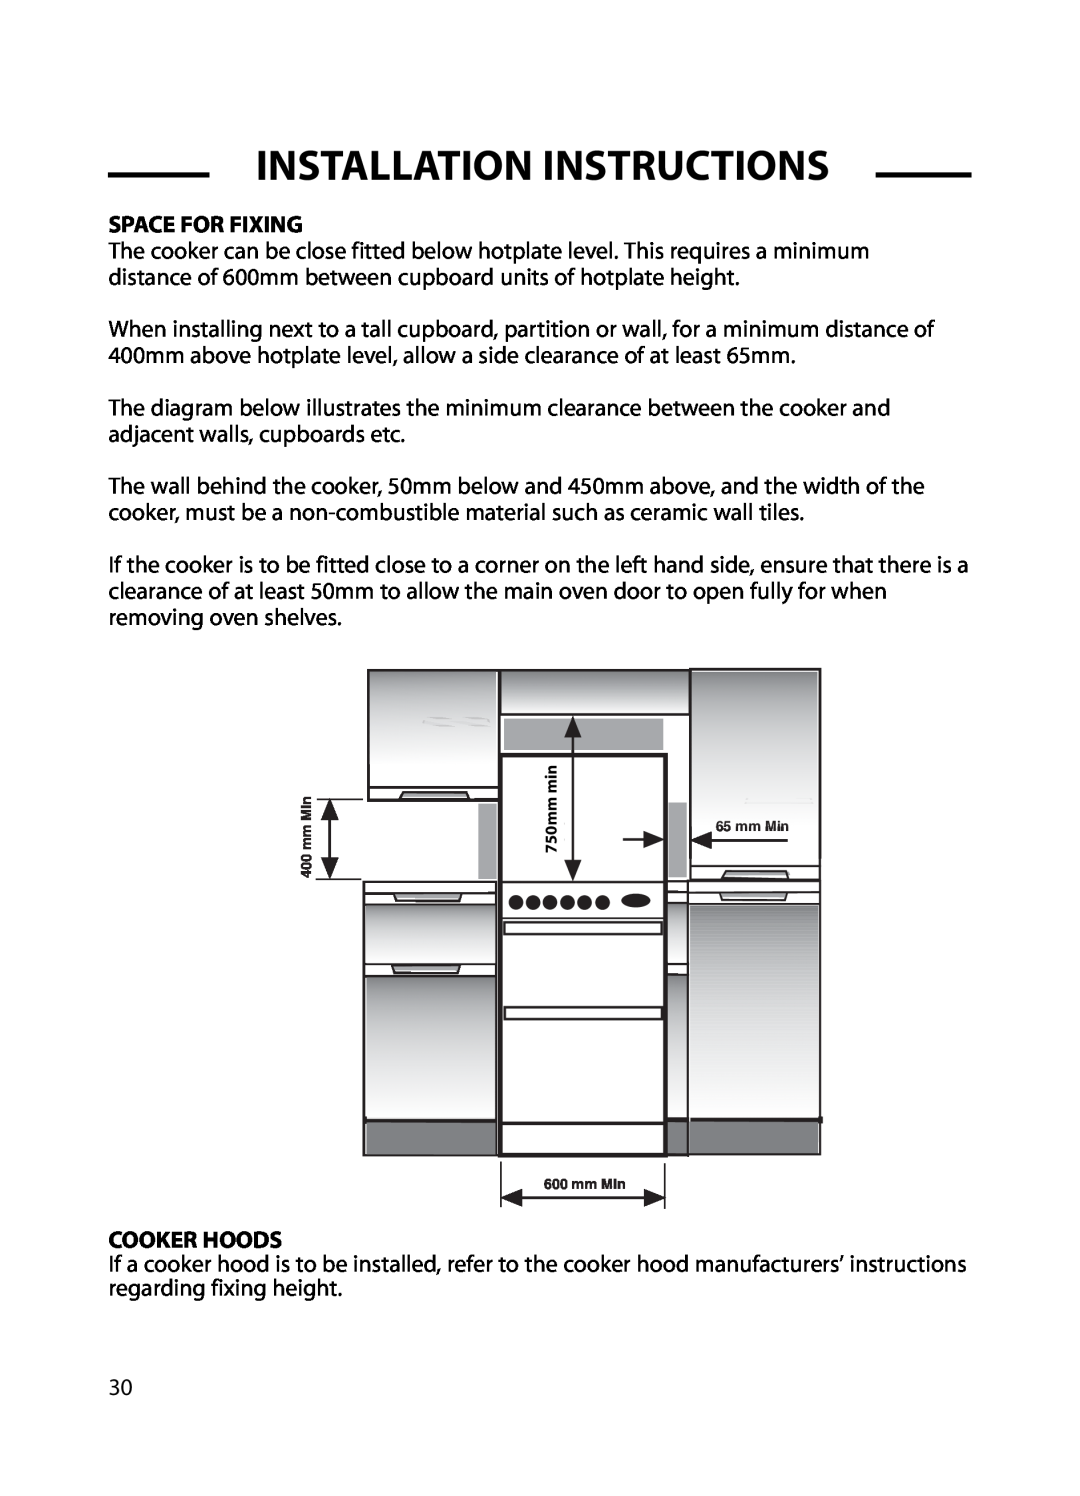 Cannon C60GT, C60GC installation instructions Space For Fixing, Cooker Hoods, Installation Instructions, 750mm 